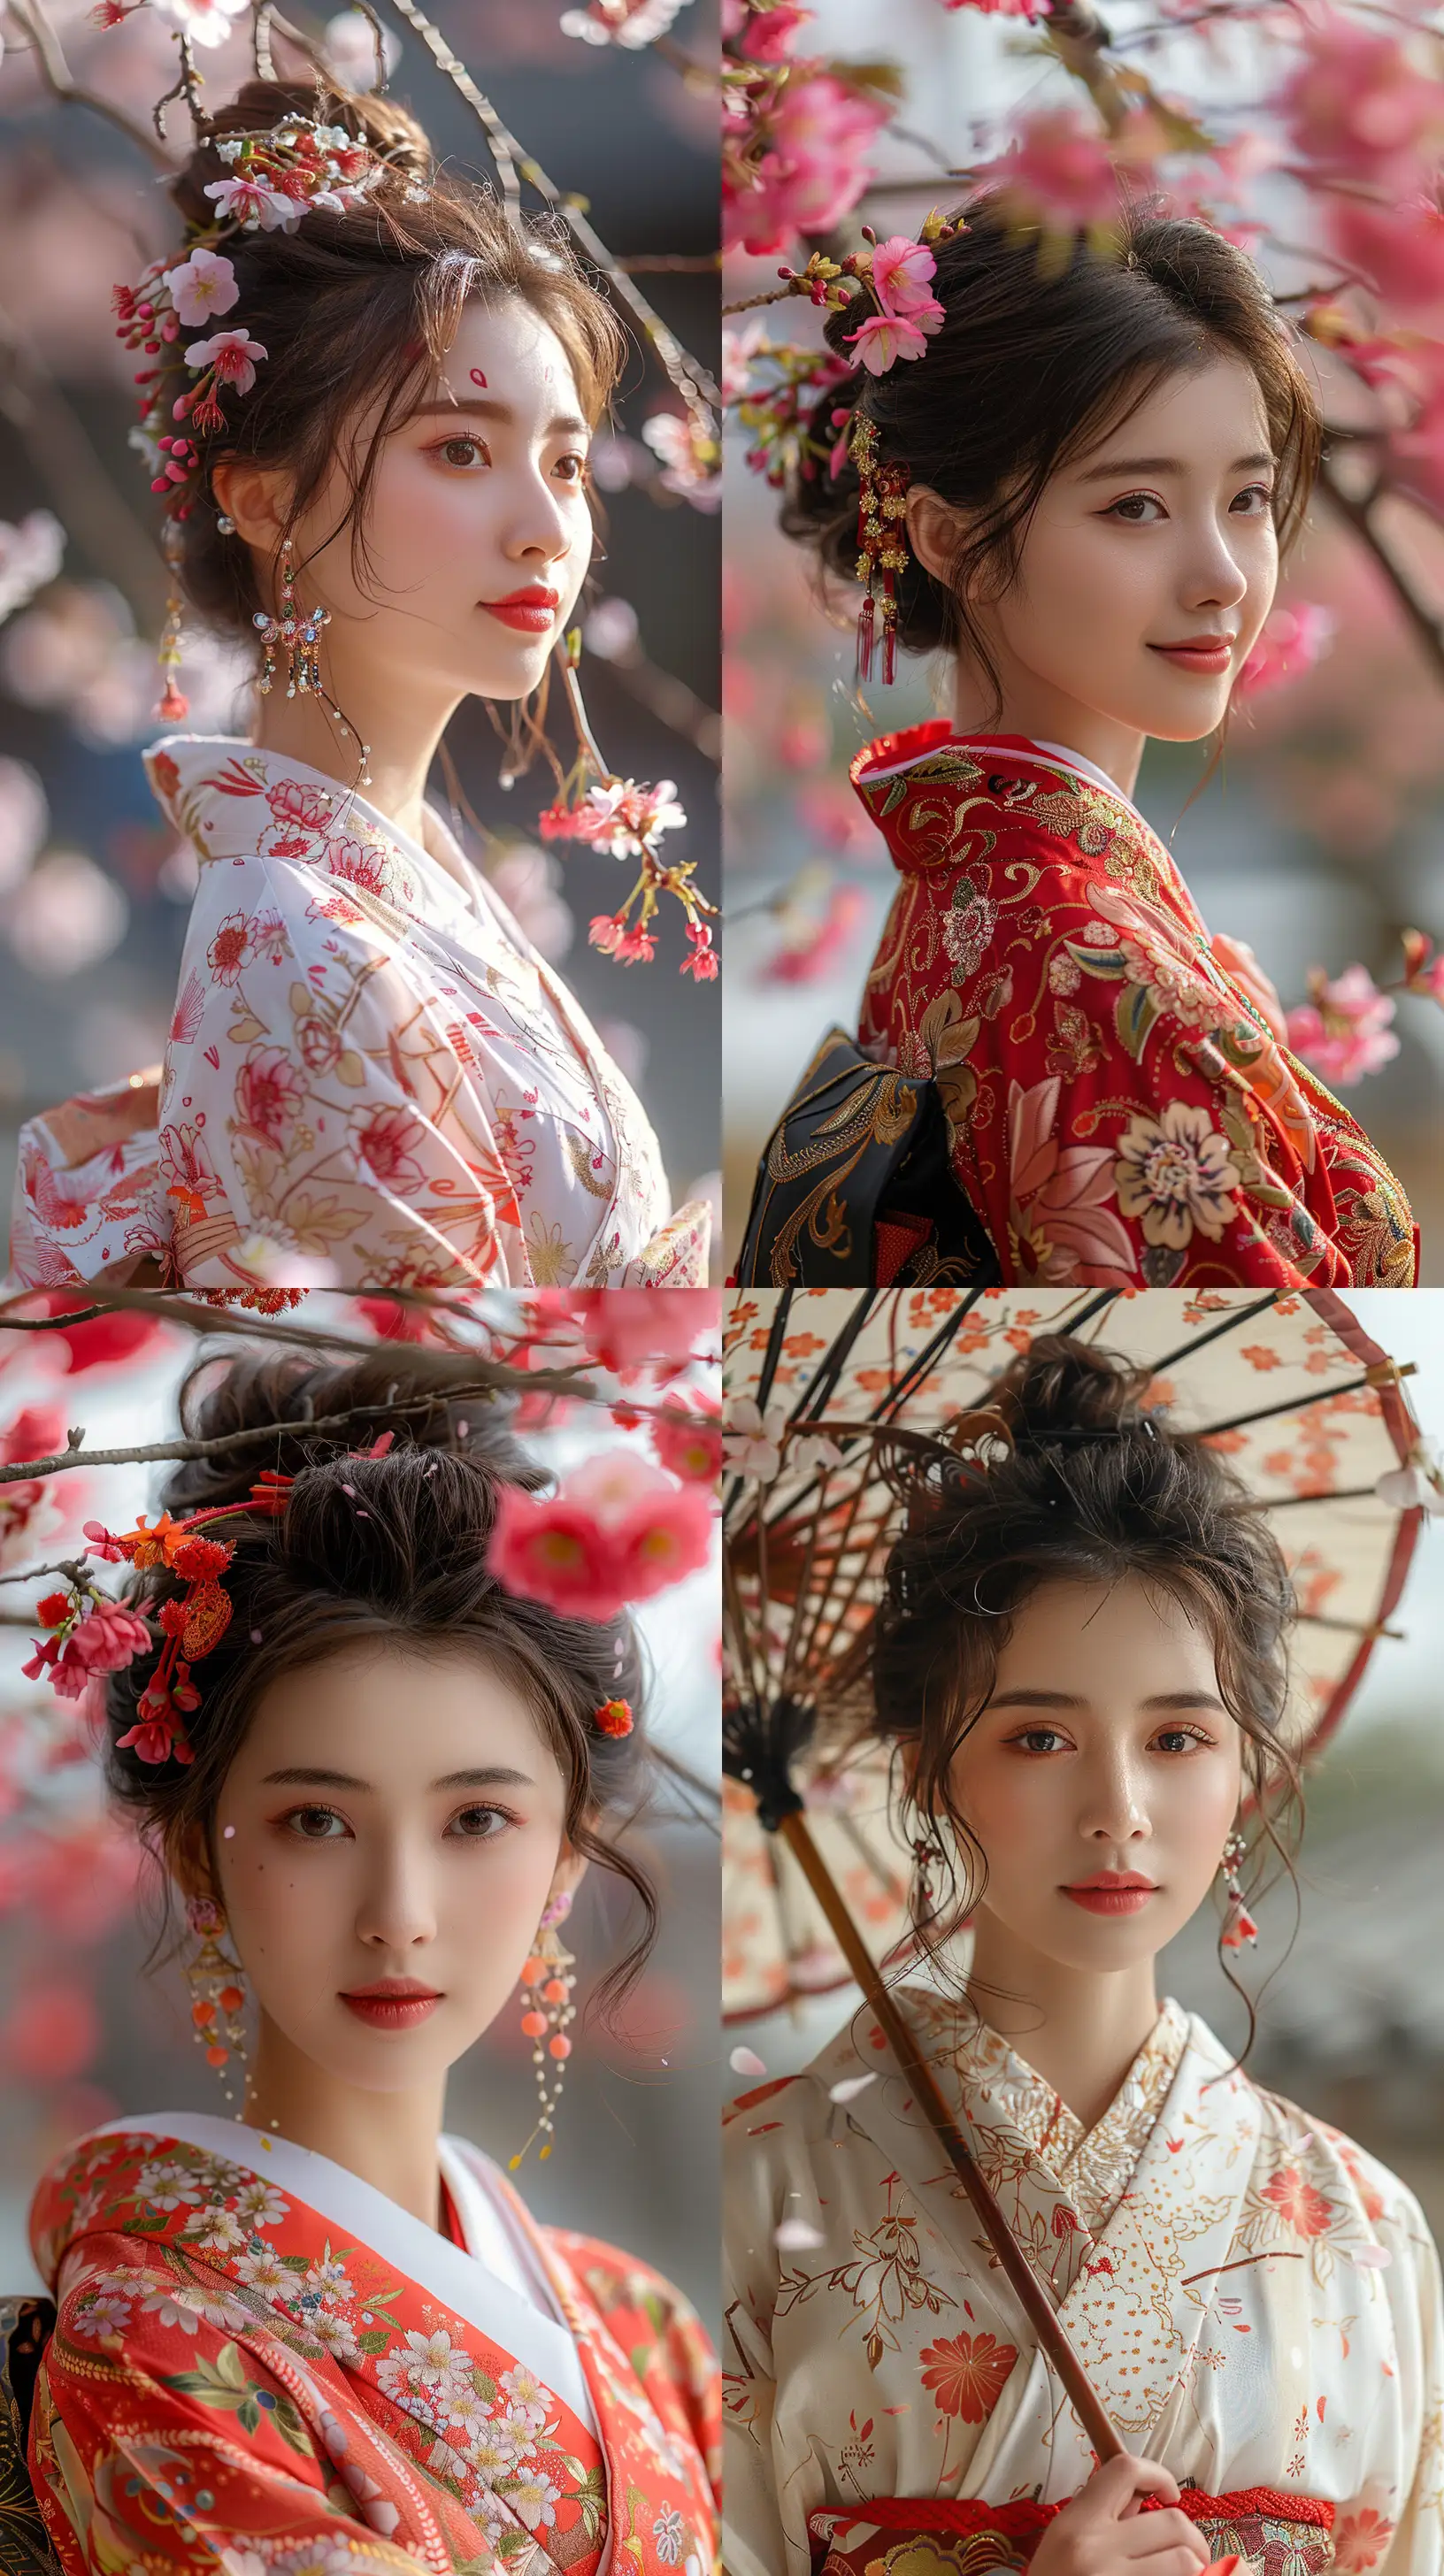 Japanese-Female-Student-in-Traditional-Attire-Amid-Cherry-Blossoms